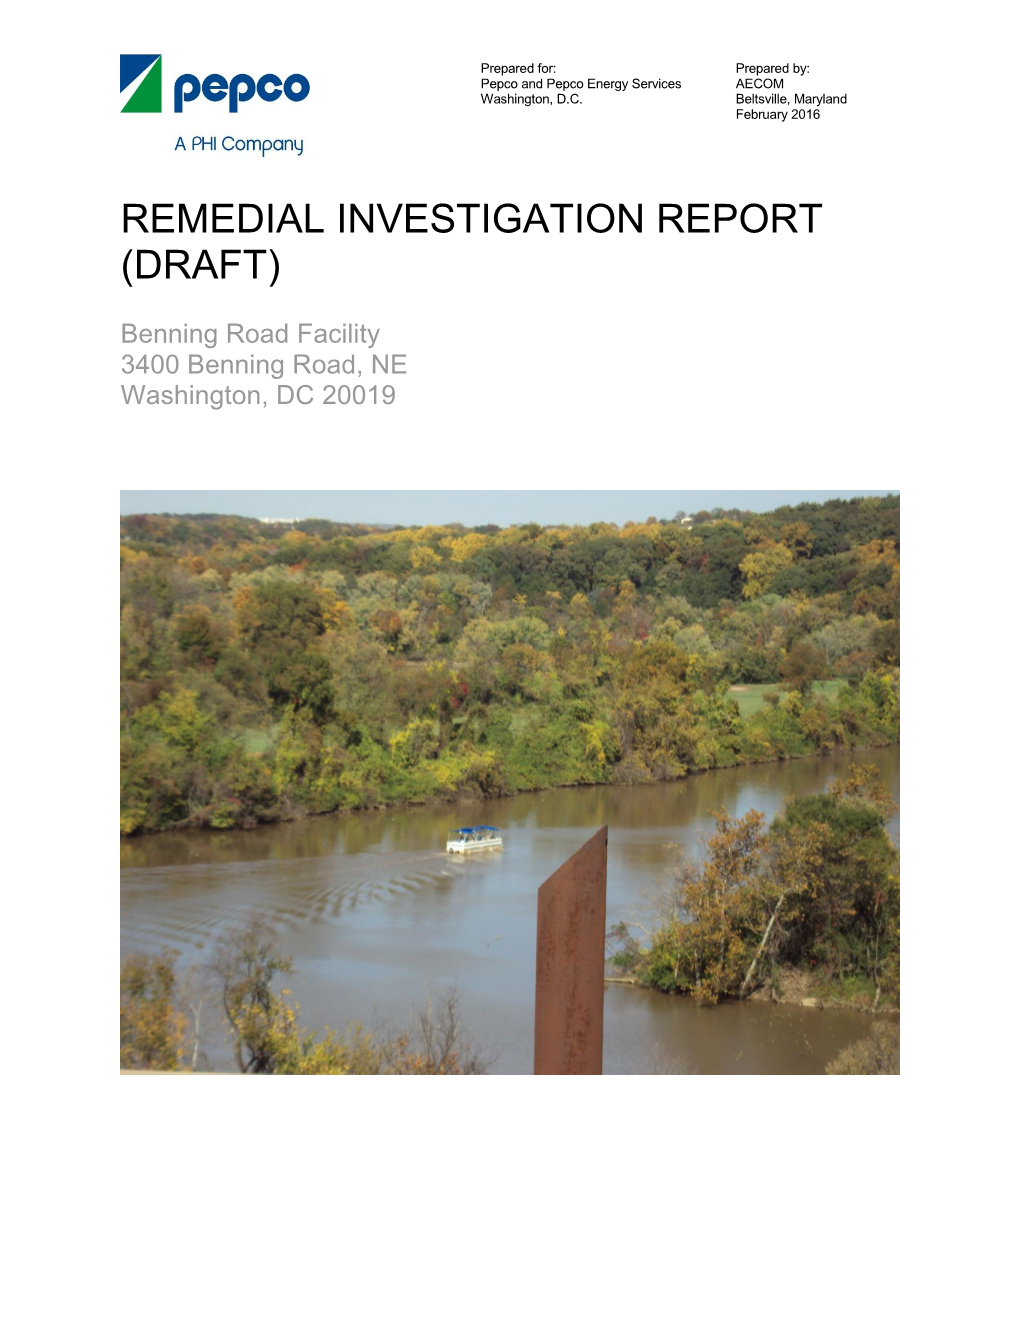 Remedial Investigation Report (Draft)